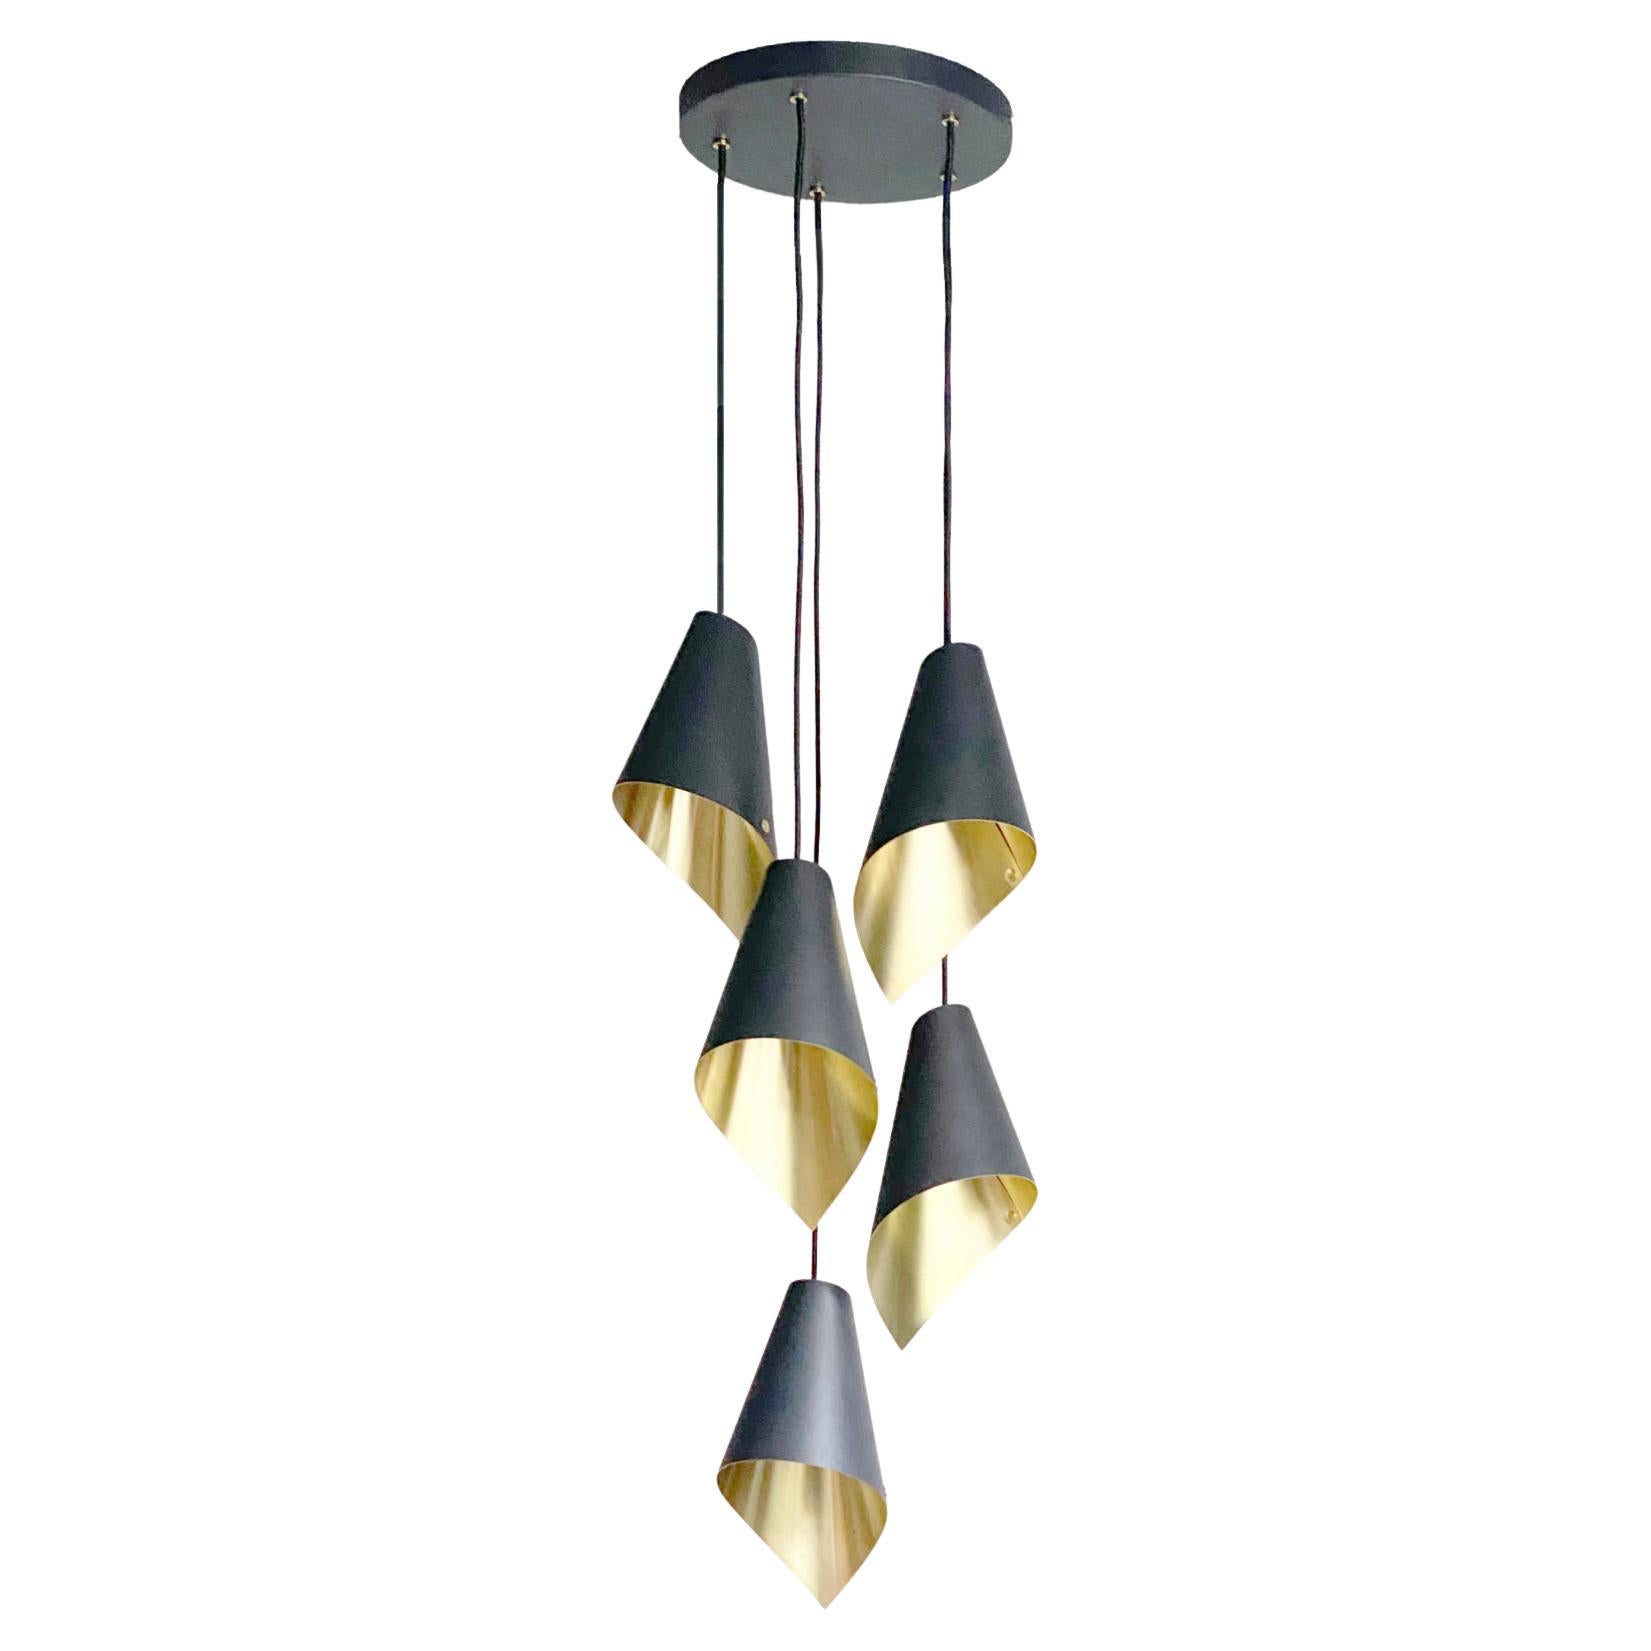 ARC 5 Ceiling Light Pendant in Black and Brushed Brass, Made in Britain For Sale